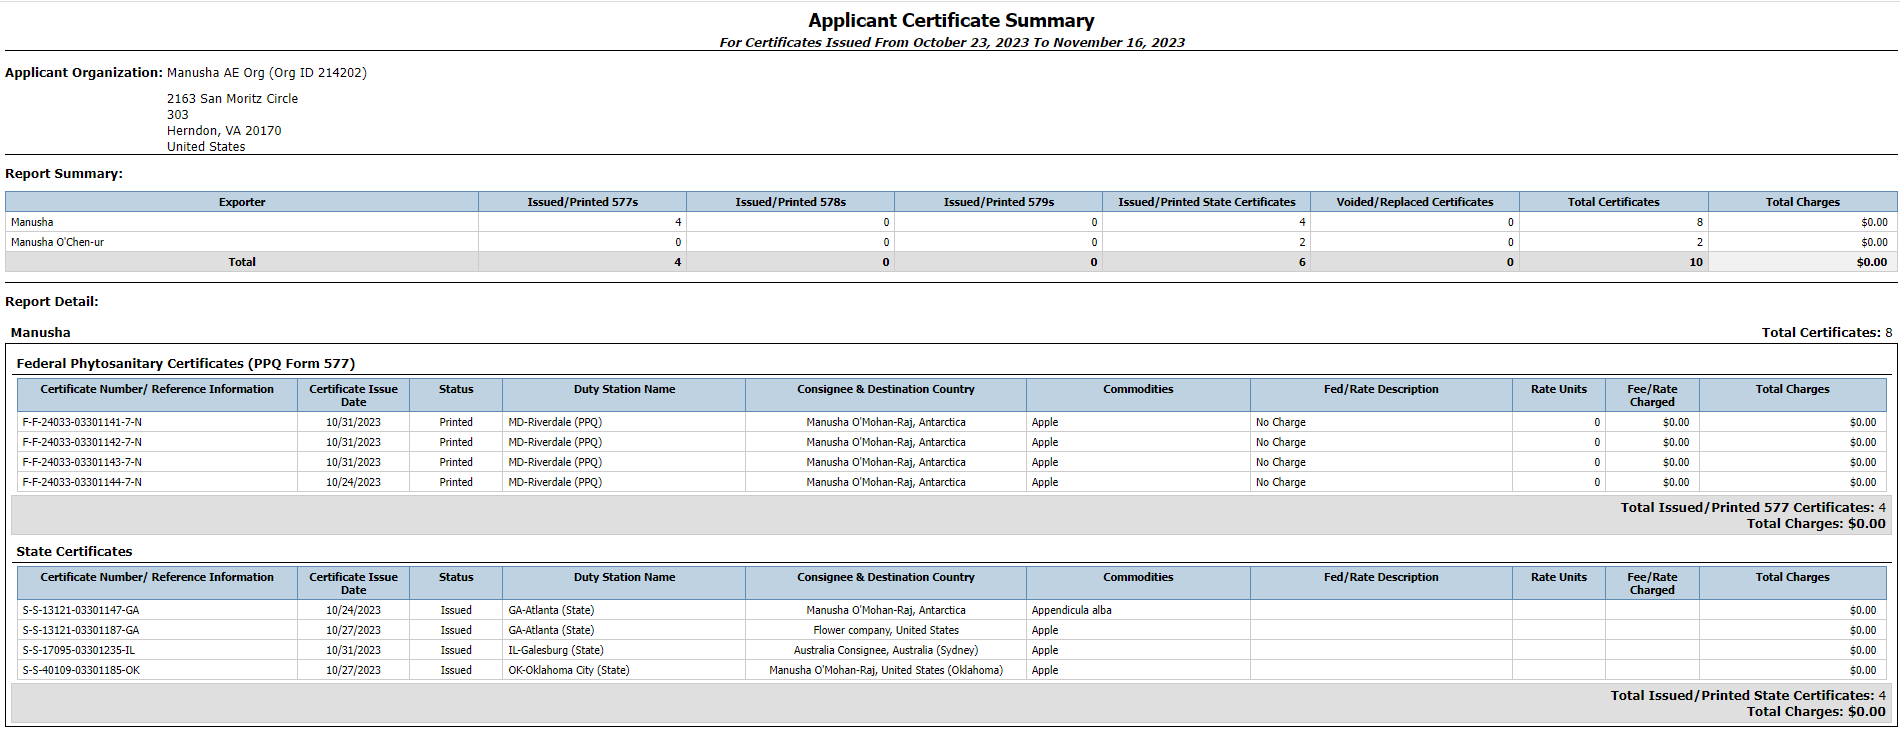 applicant_certificate_summary